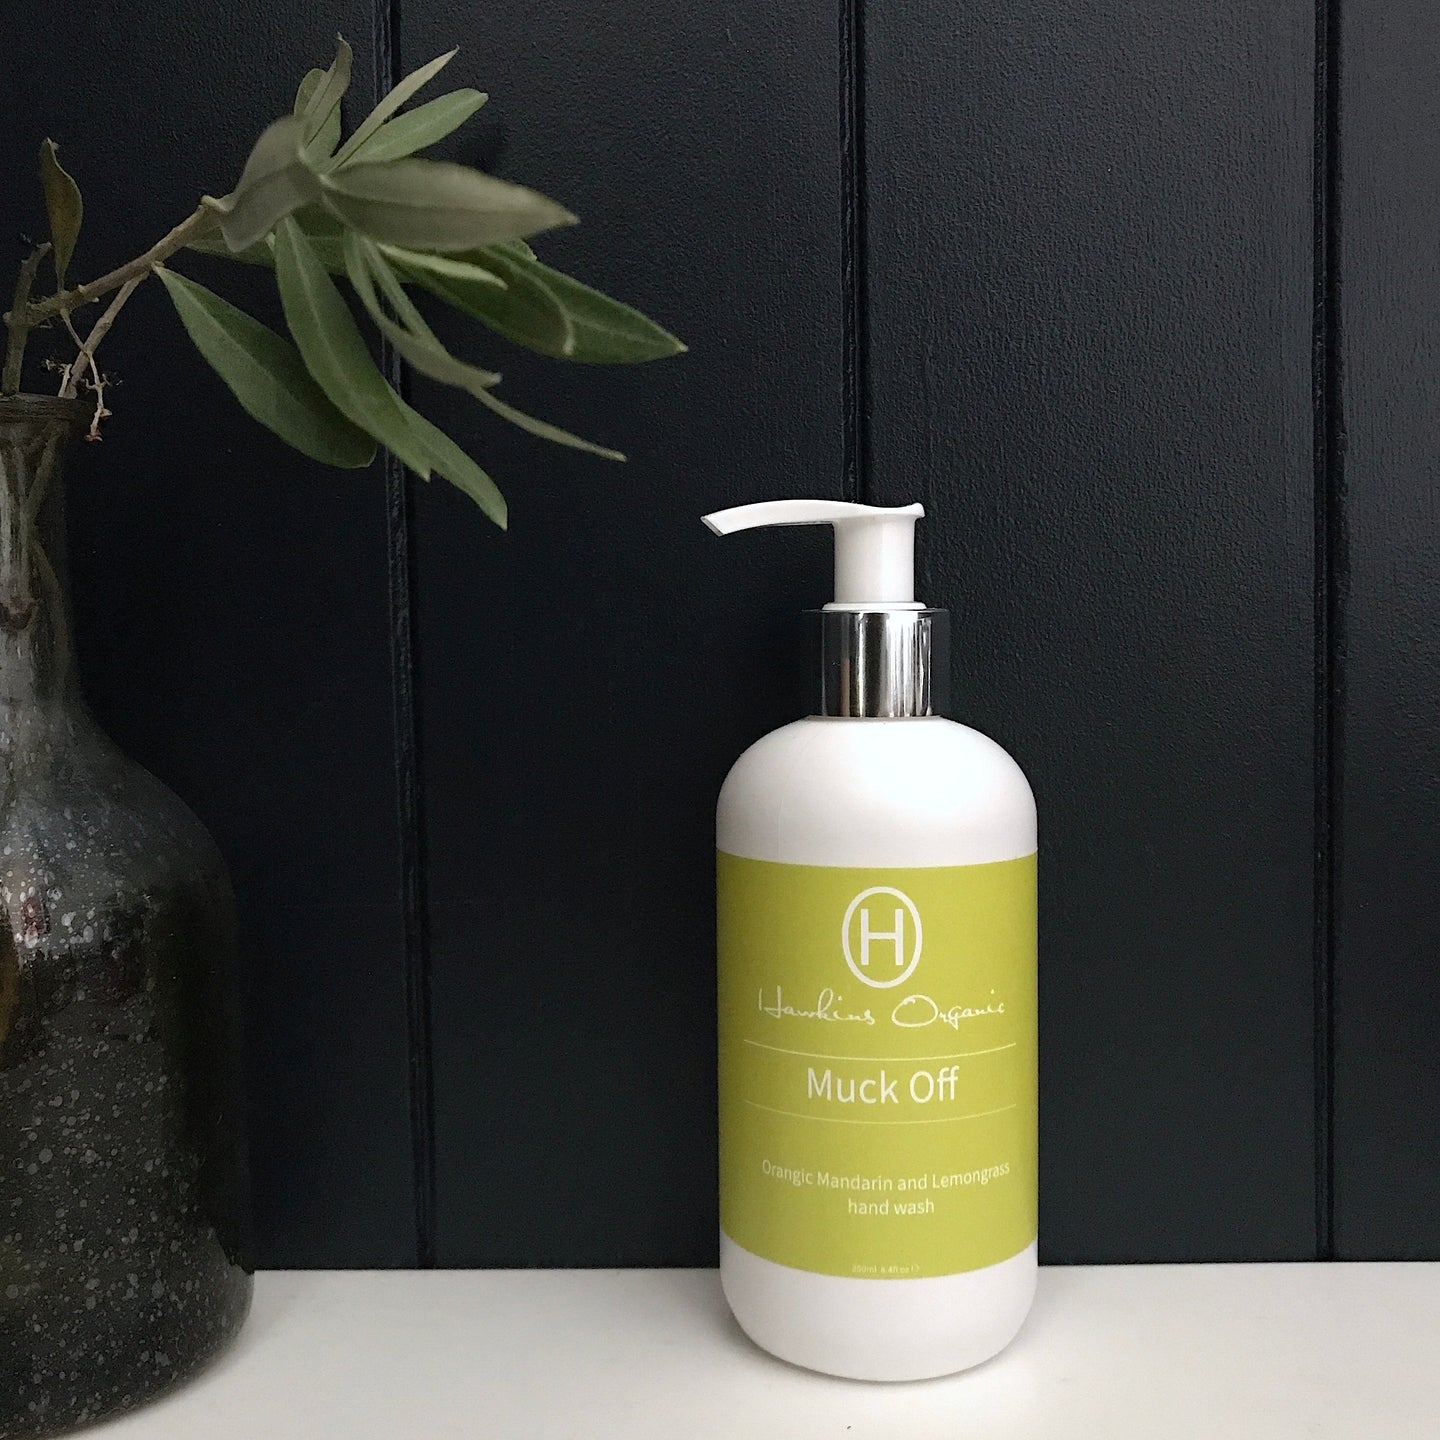 Muck Off - Hand Wash Spearmint and Lemongrass 250ml - sold out